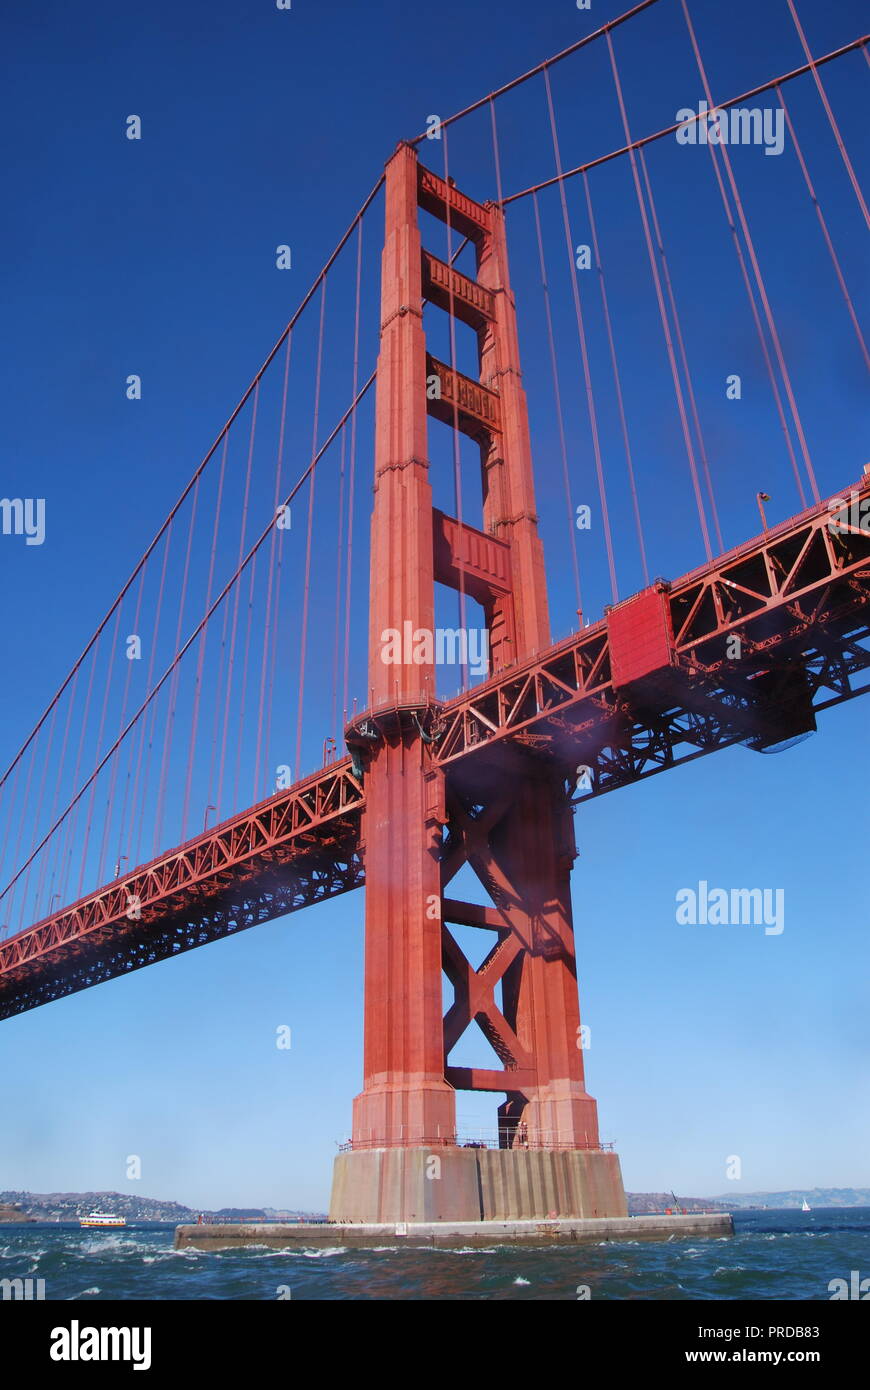 The 746-foot south tower of the Golden Gate Bridge photographed from the Pacific Ocean. San Francisco, California, USA. Stock Photo